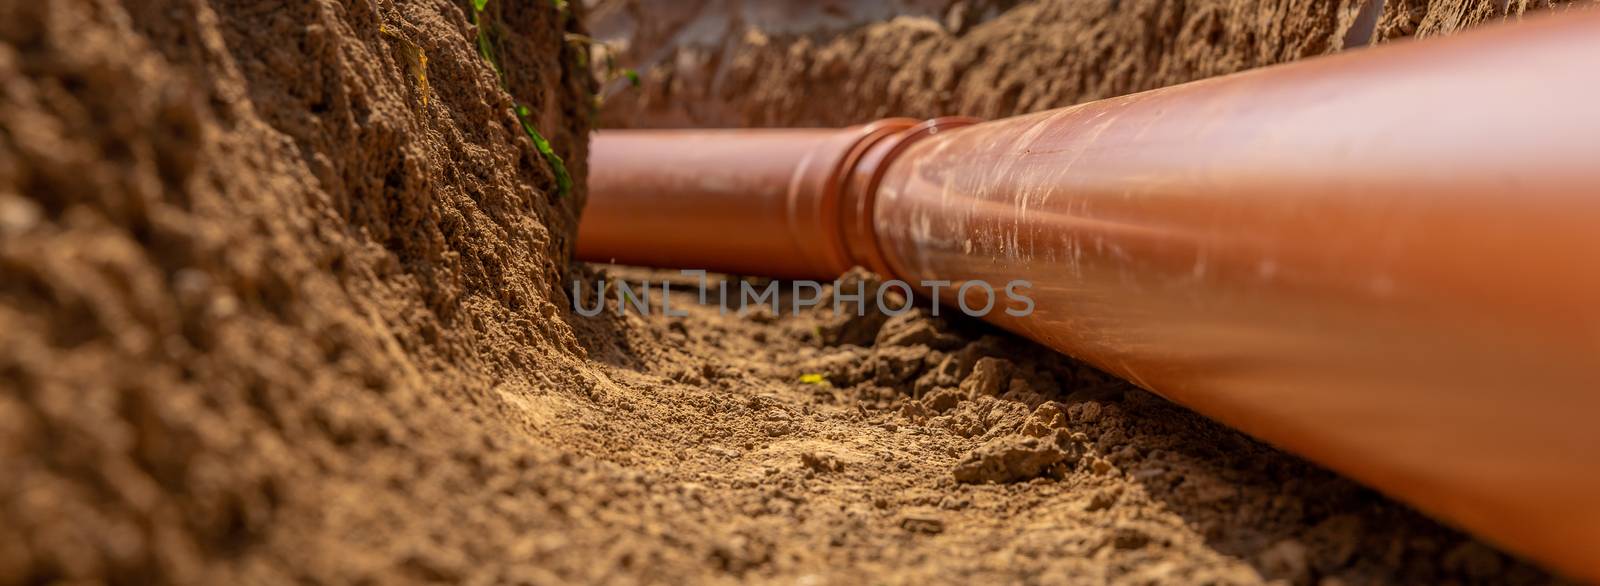 Plastic pipes in the ground during the construction of a building, bunner with copy space by Edophoto